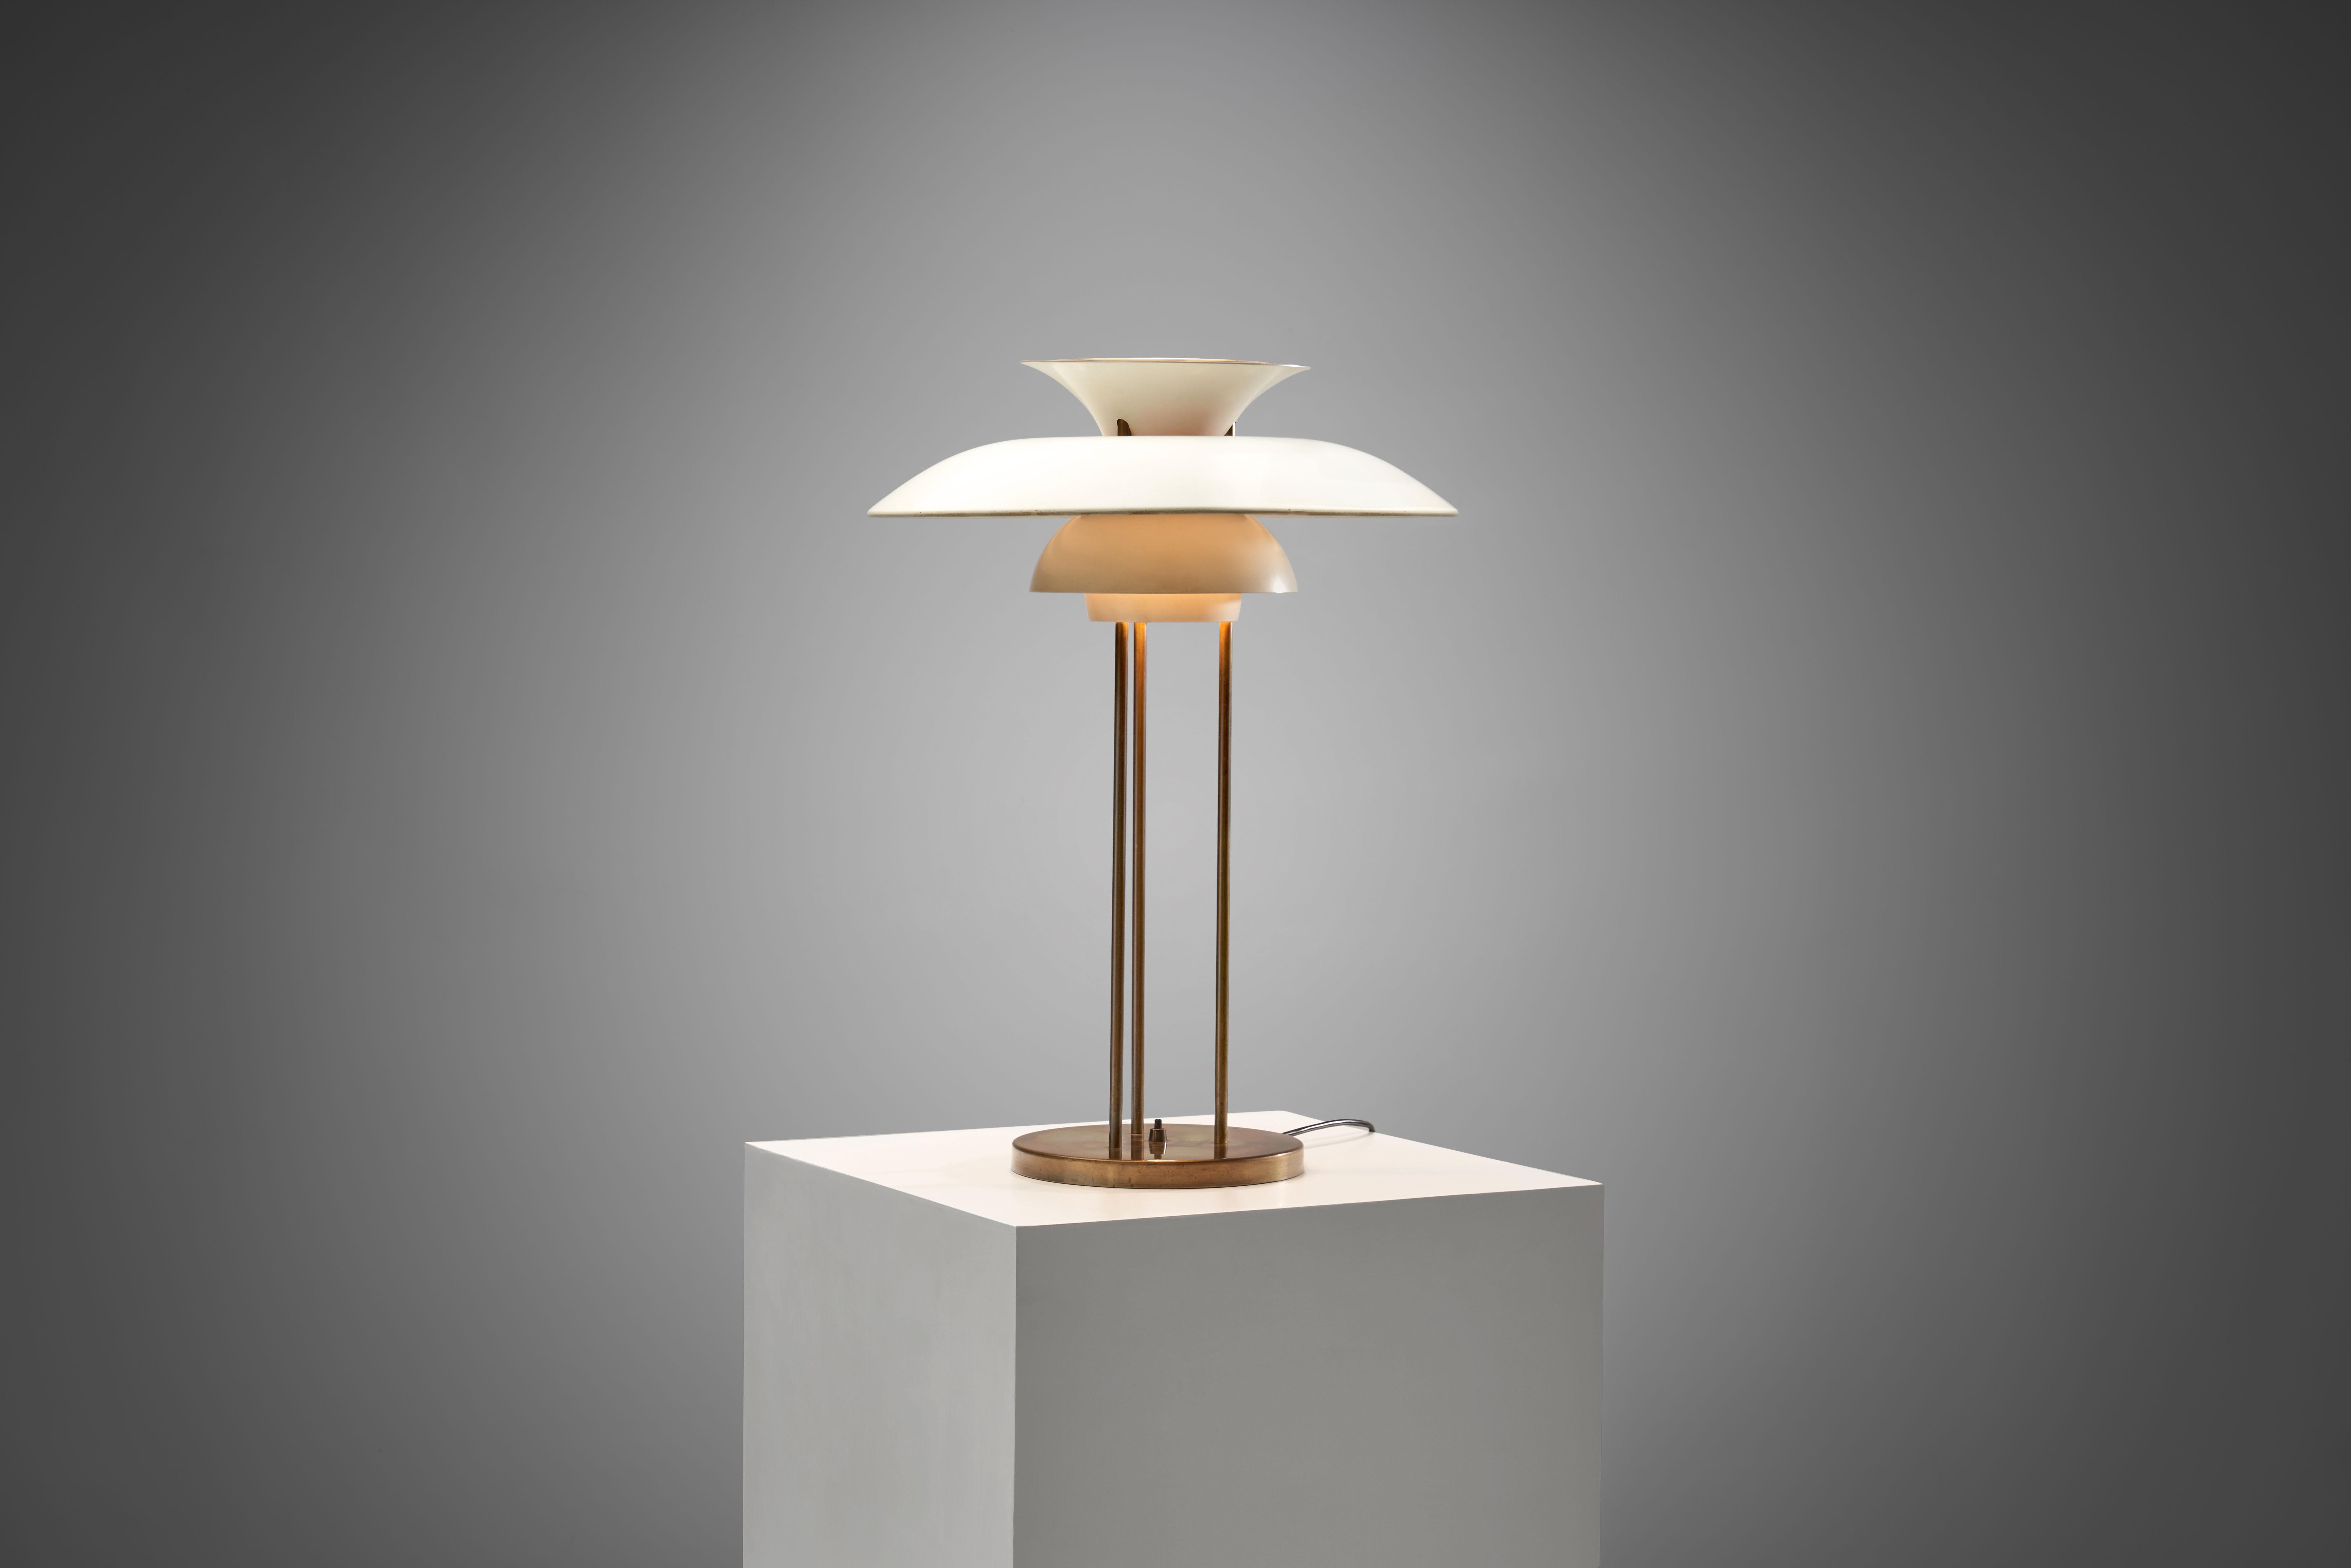 This “PH-5” table lamp from the Danish “Master of Soft Light”, Poul Henningsen is one of the designer’s most popular models, and is considered to be an icon of Scandinavian modern design.

Perhaps the most recognizable of all the Poul Henningsen